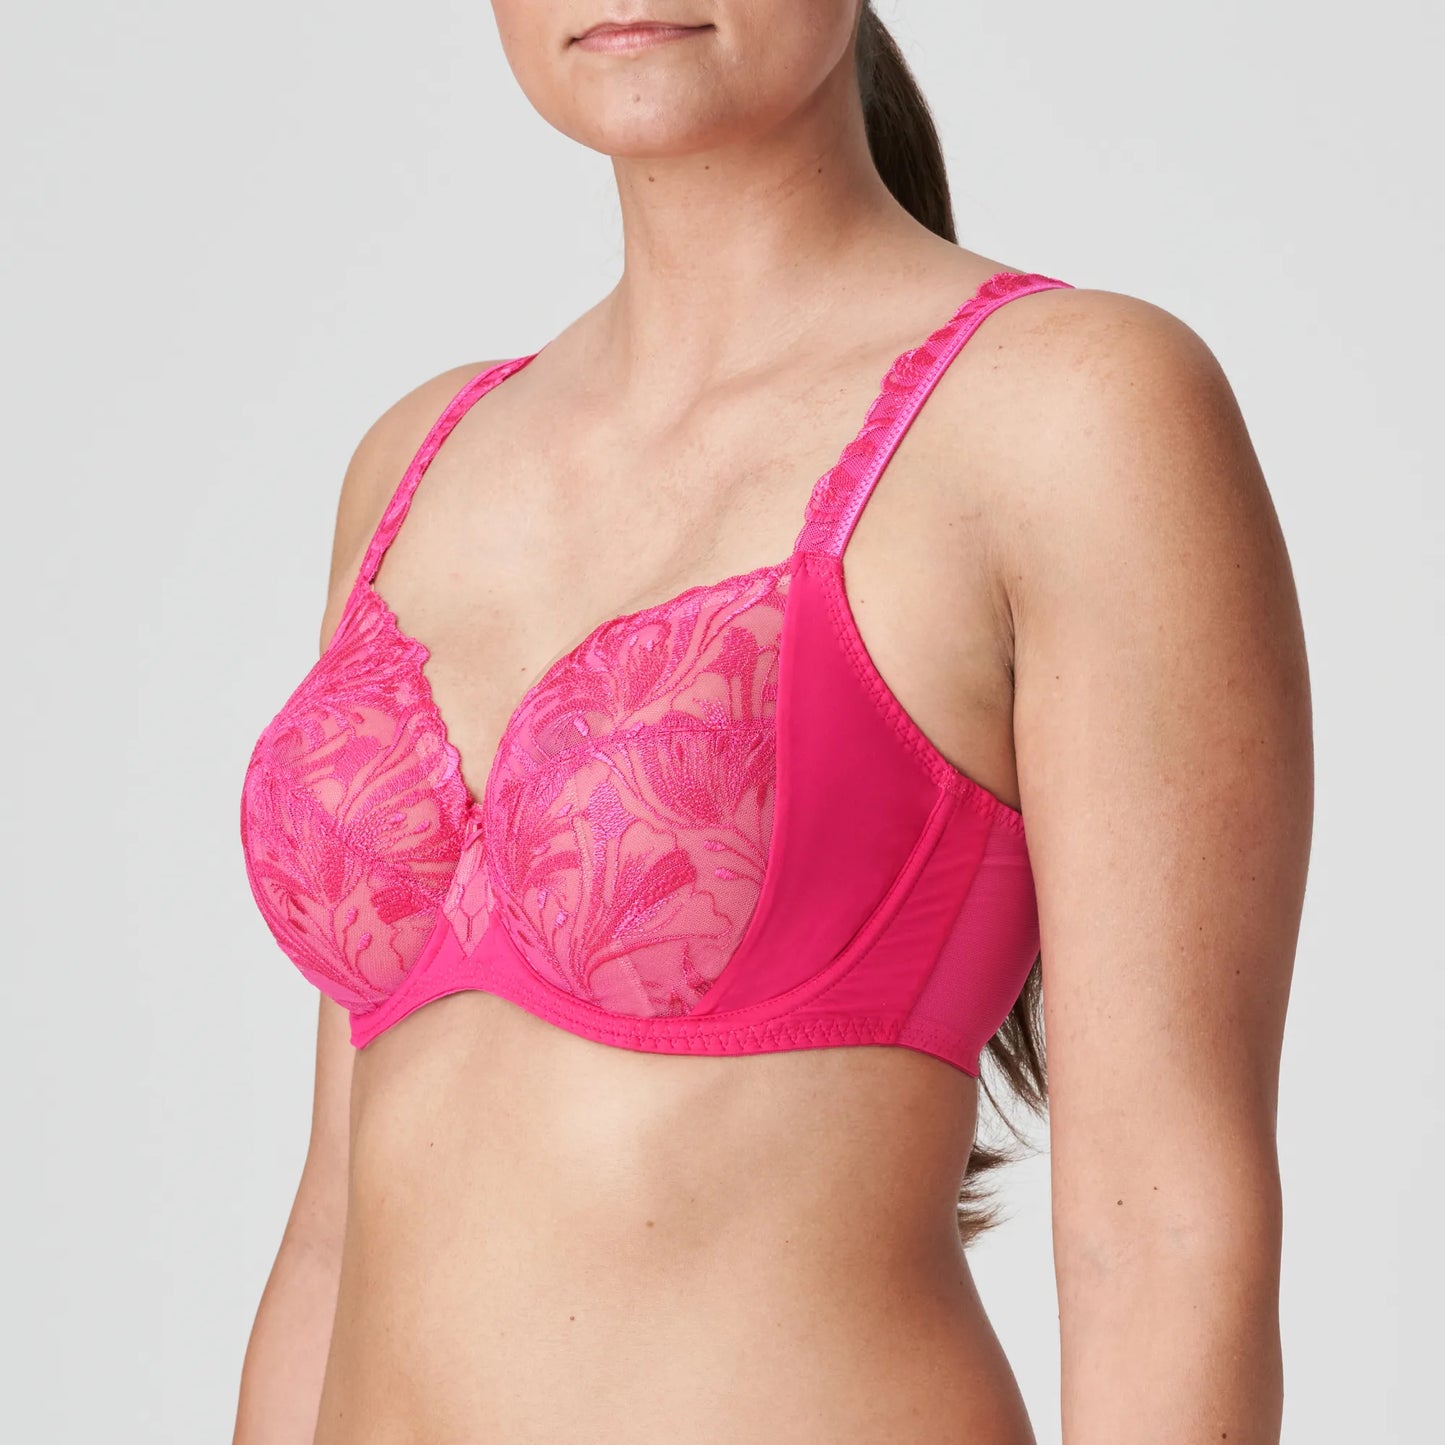 Prima Donna Beugel BH - Disah 0163420 - Electric pink